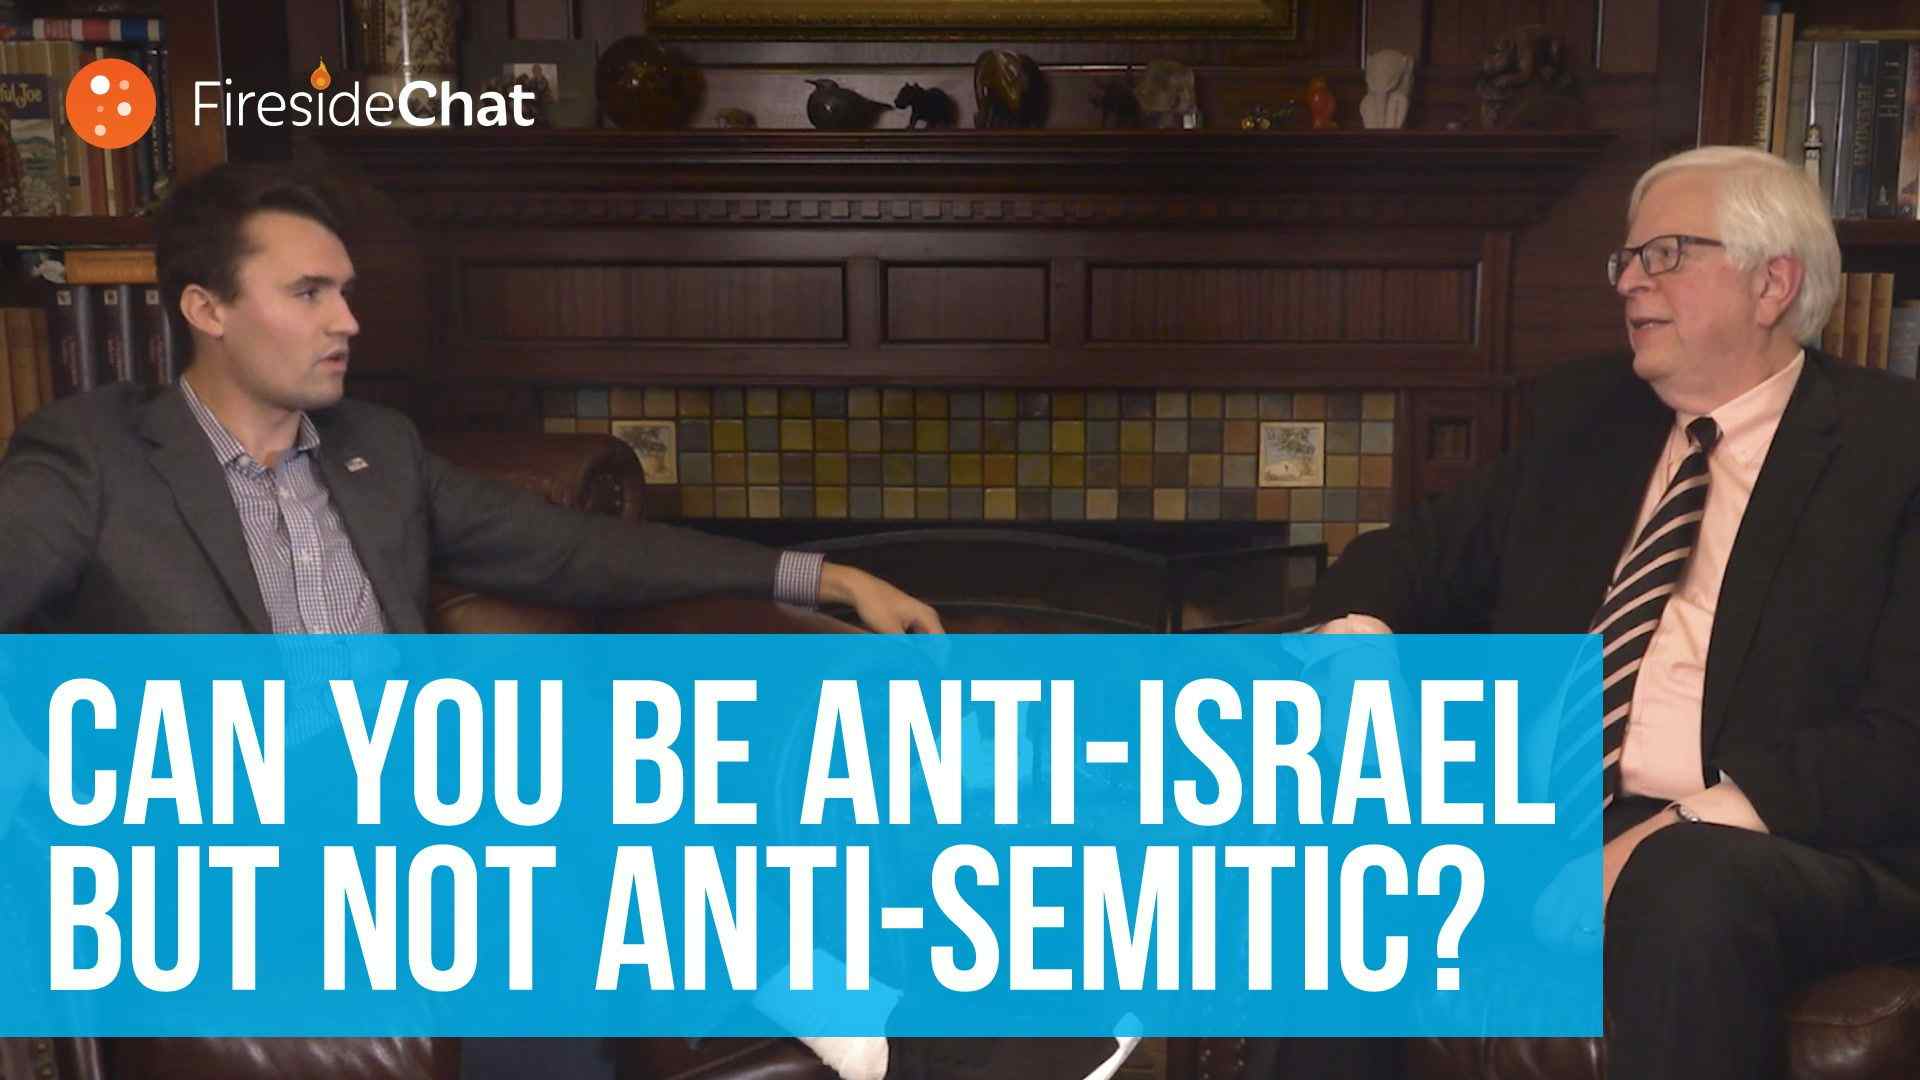 Can You Be Anti-Israel but Not Antisemitic?